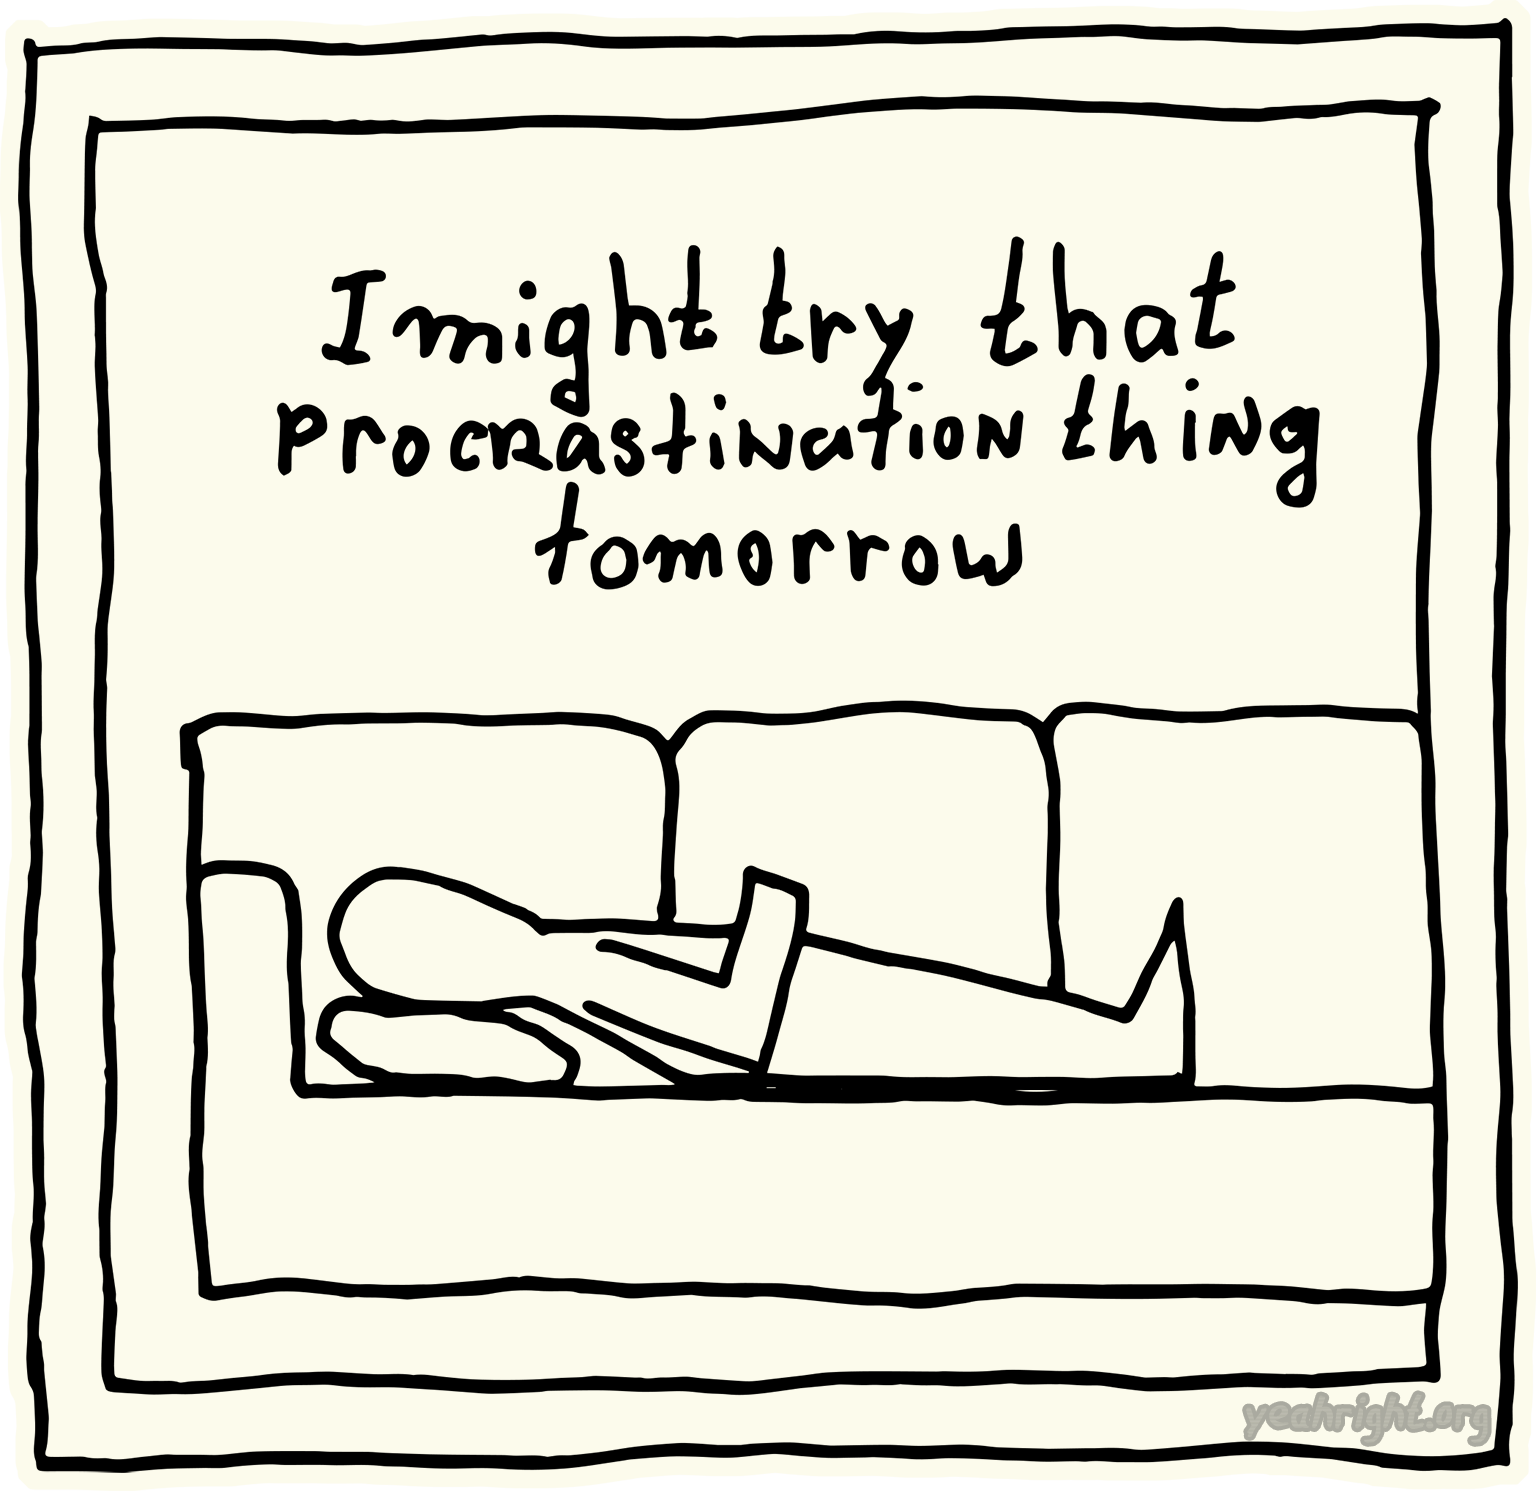 Yeah Right! is laying on the couch, saying: "I might try that procrastination thing tomorrow"